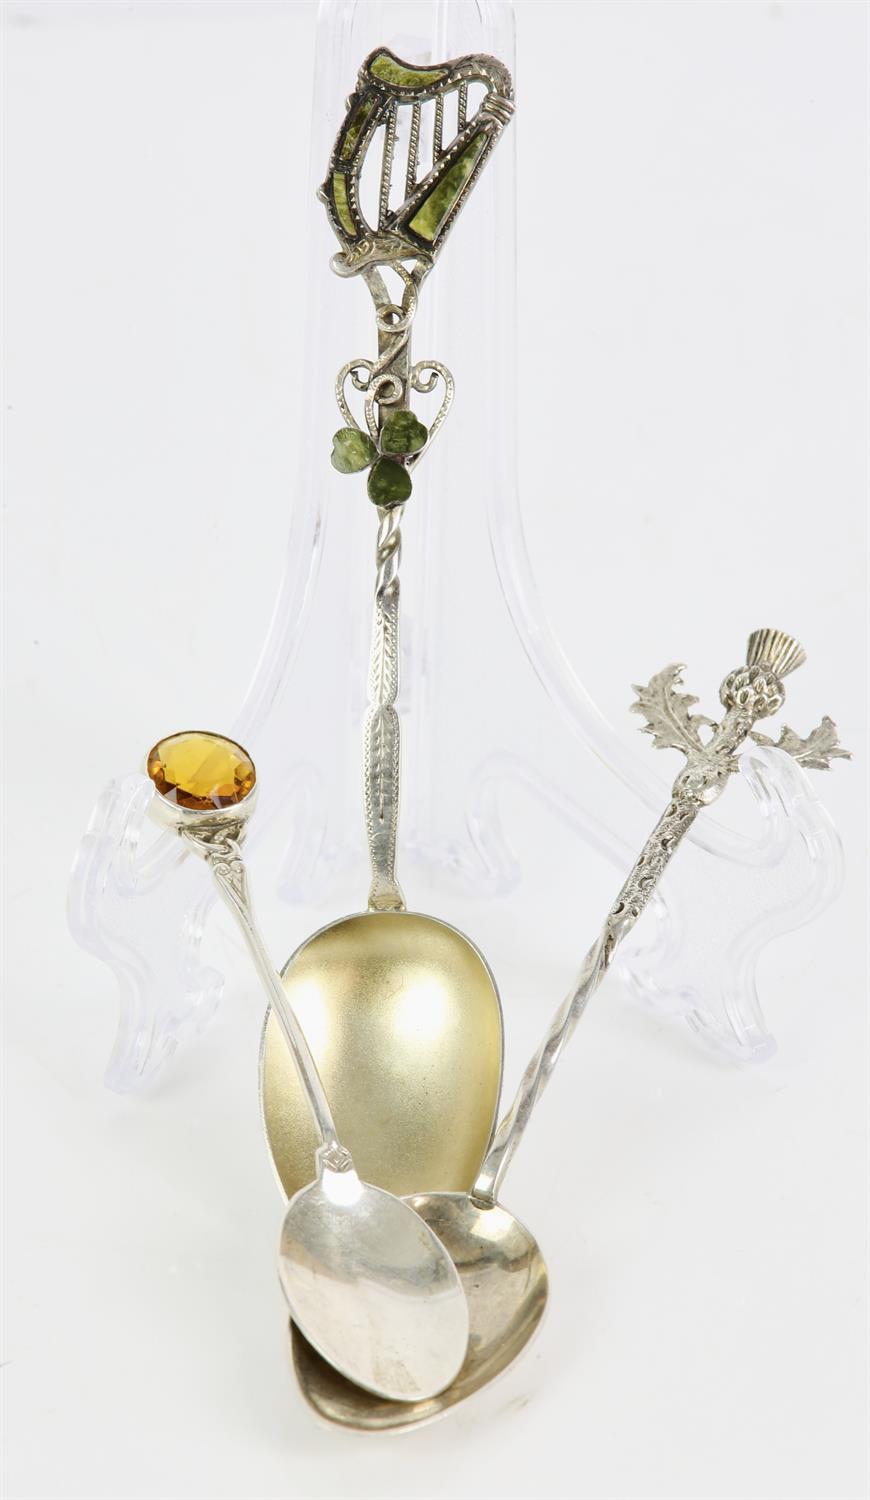 Irish theme stone set harp top, silver spoon, a thistle topped silver spoon, and a cabochon set